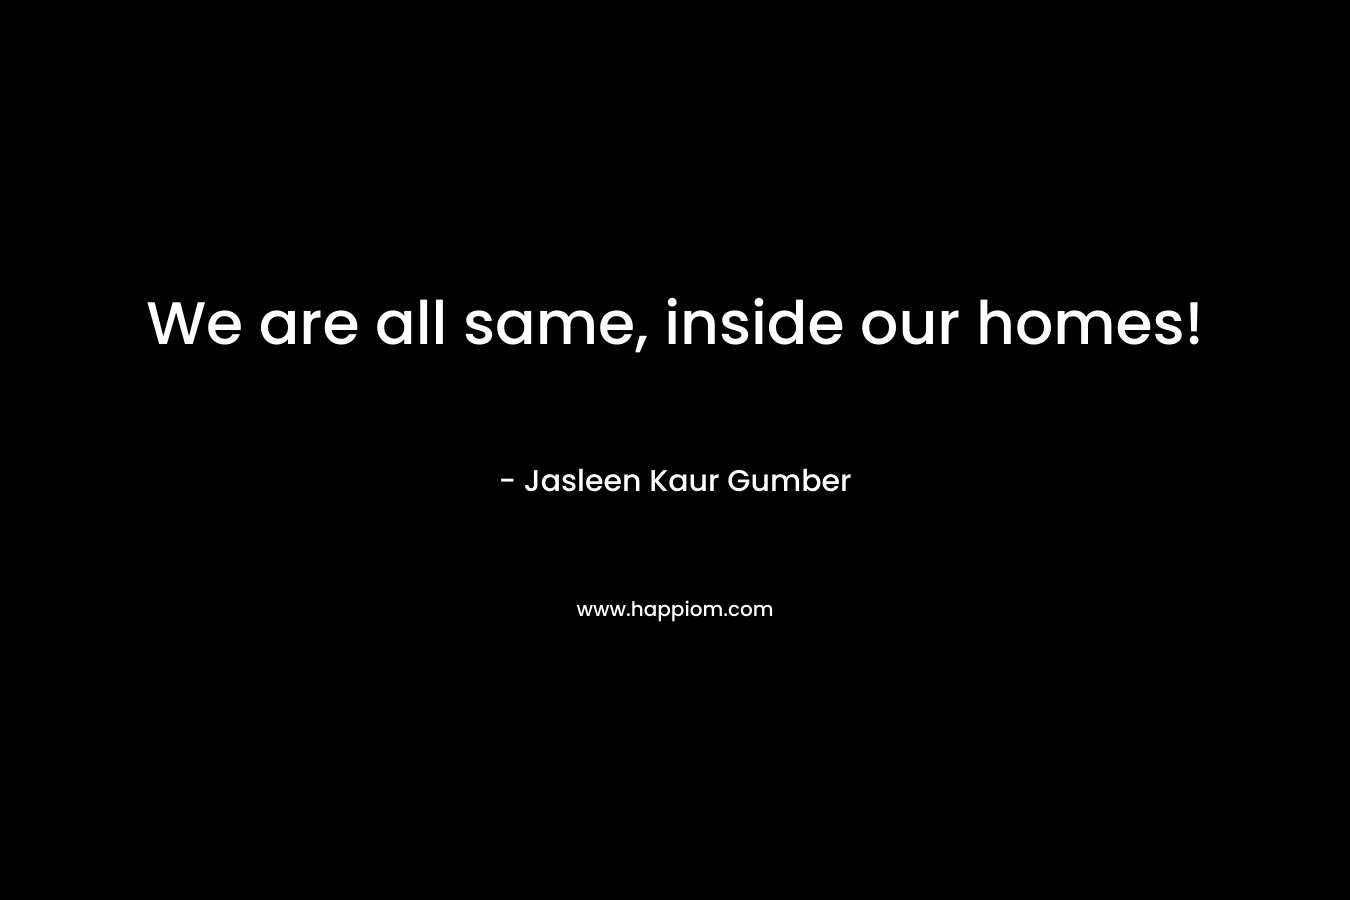 We are all same, inside our homes!